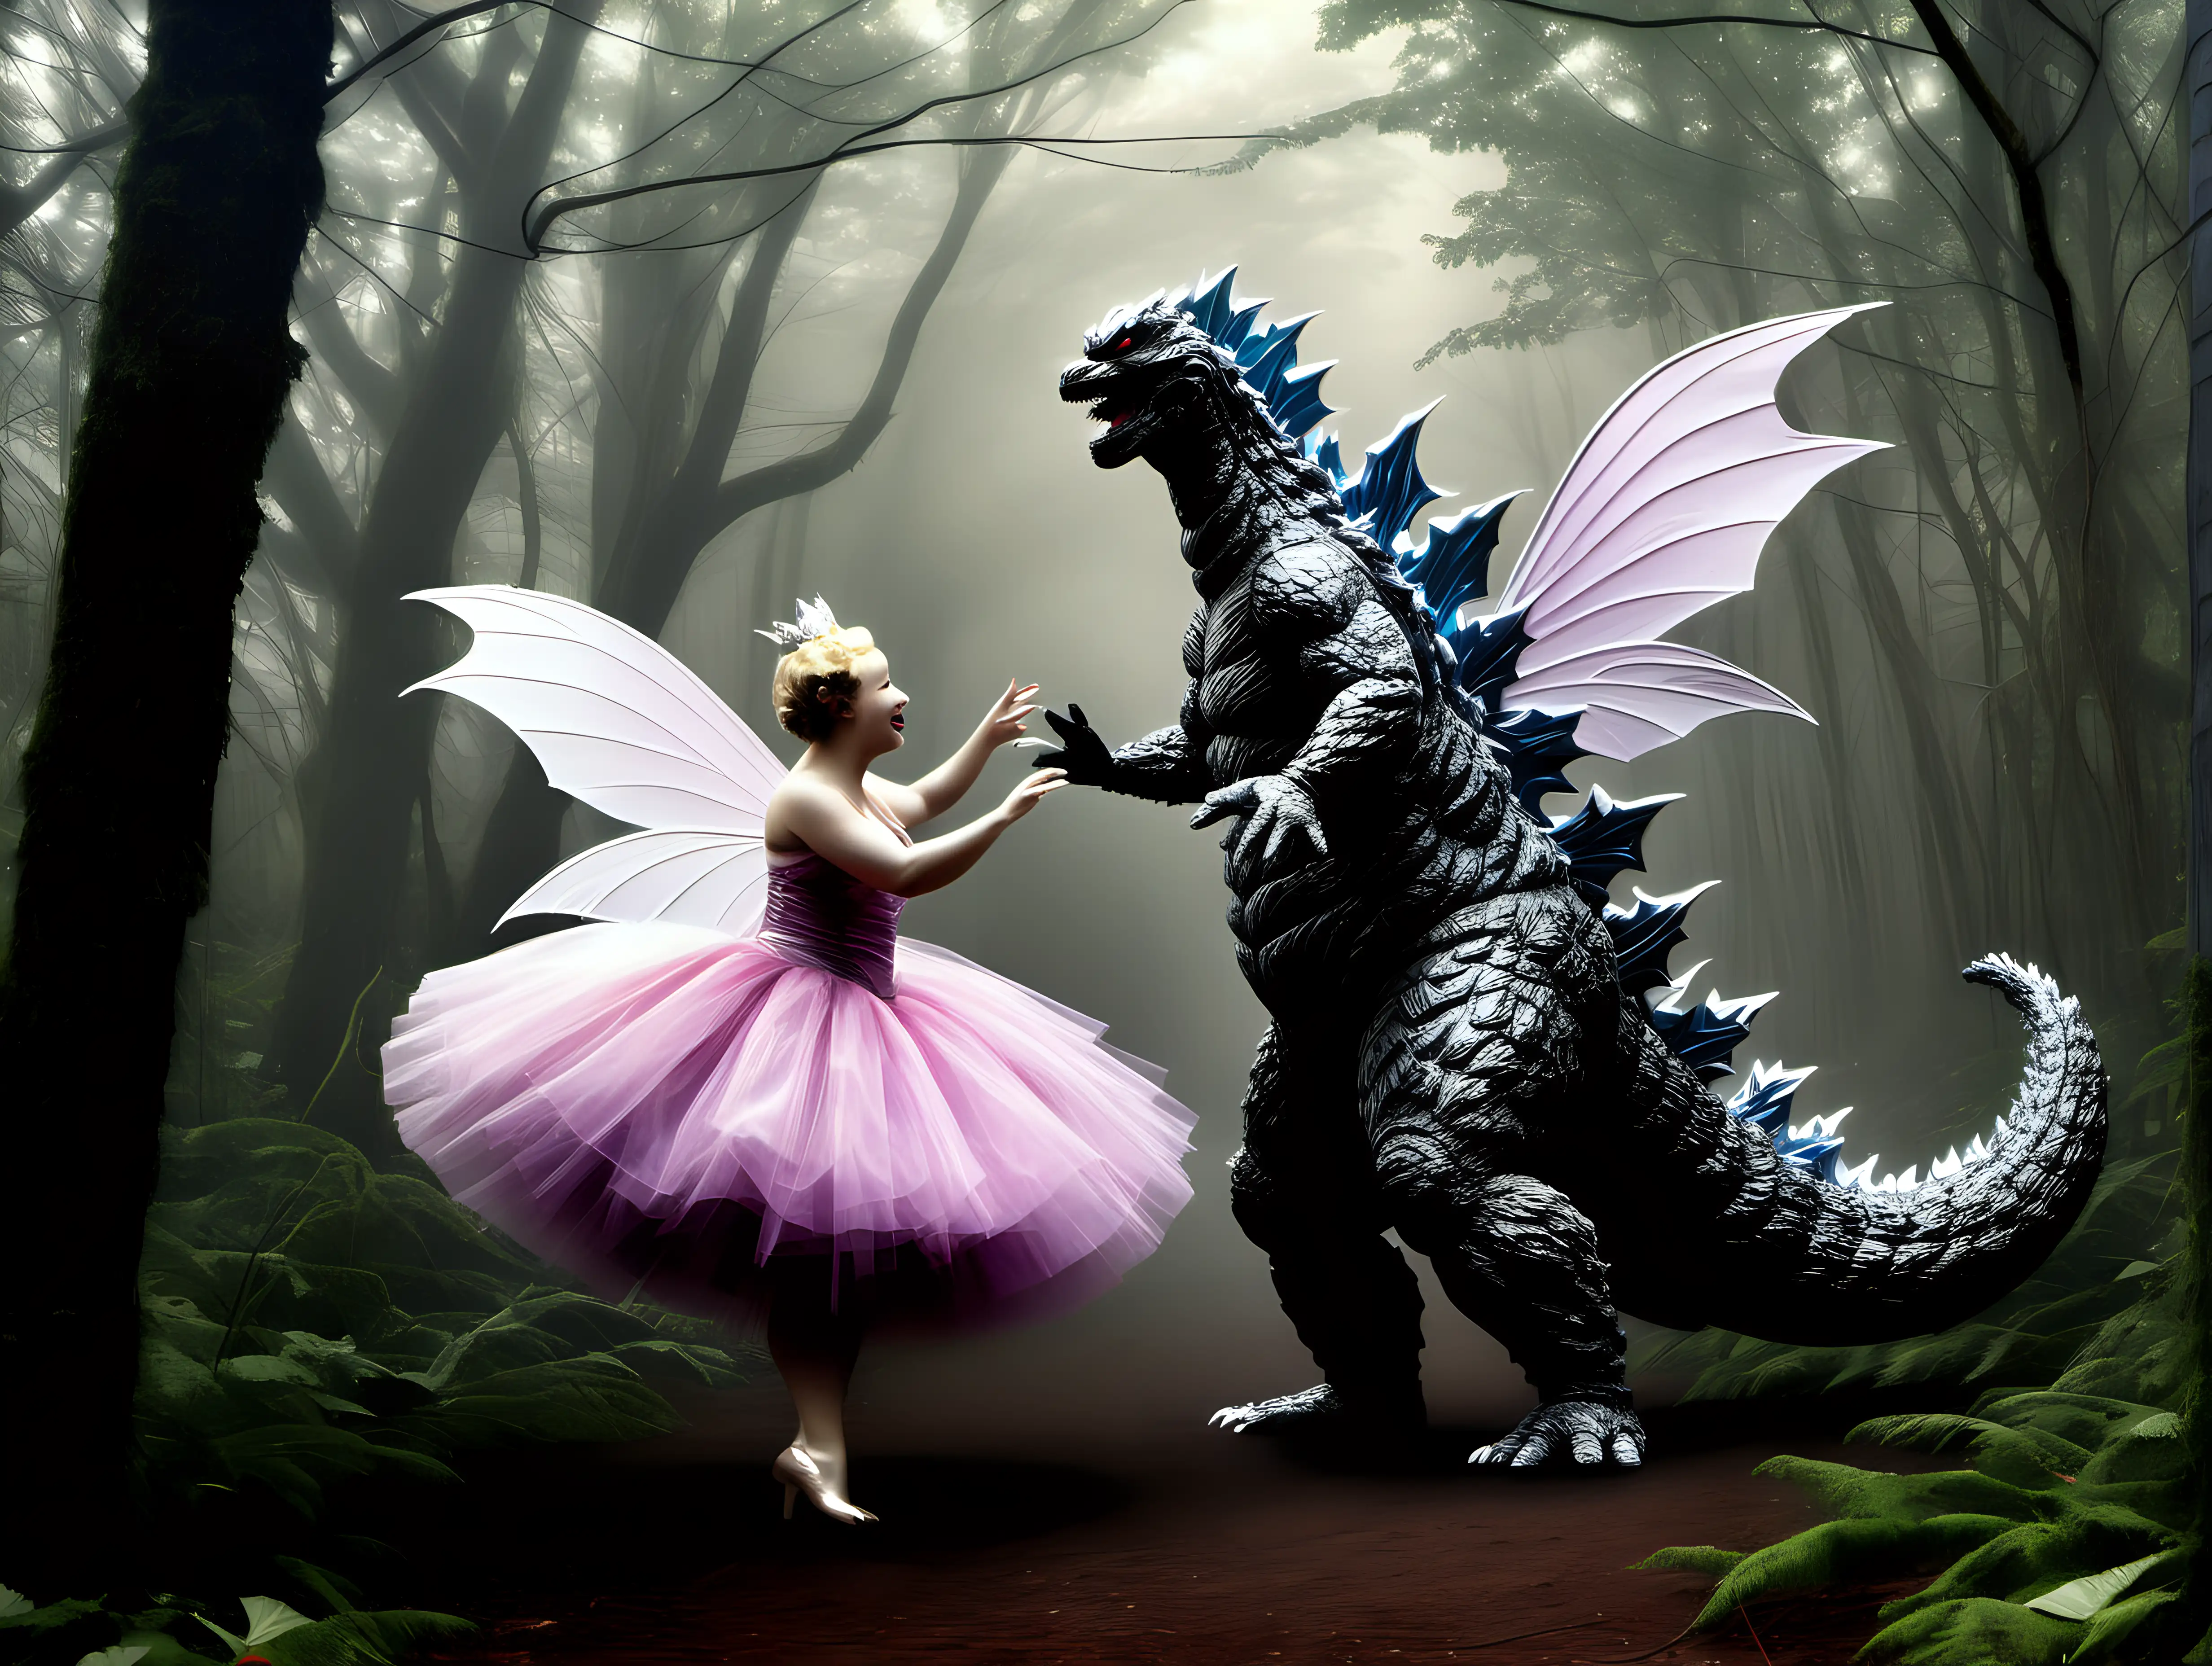 Godzilla and the Dance of the sugar plum fairy in an enchanted forest